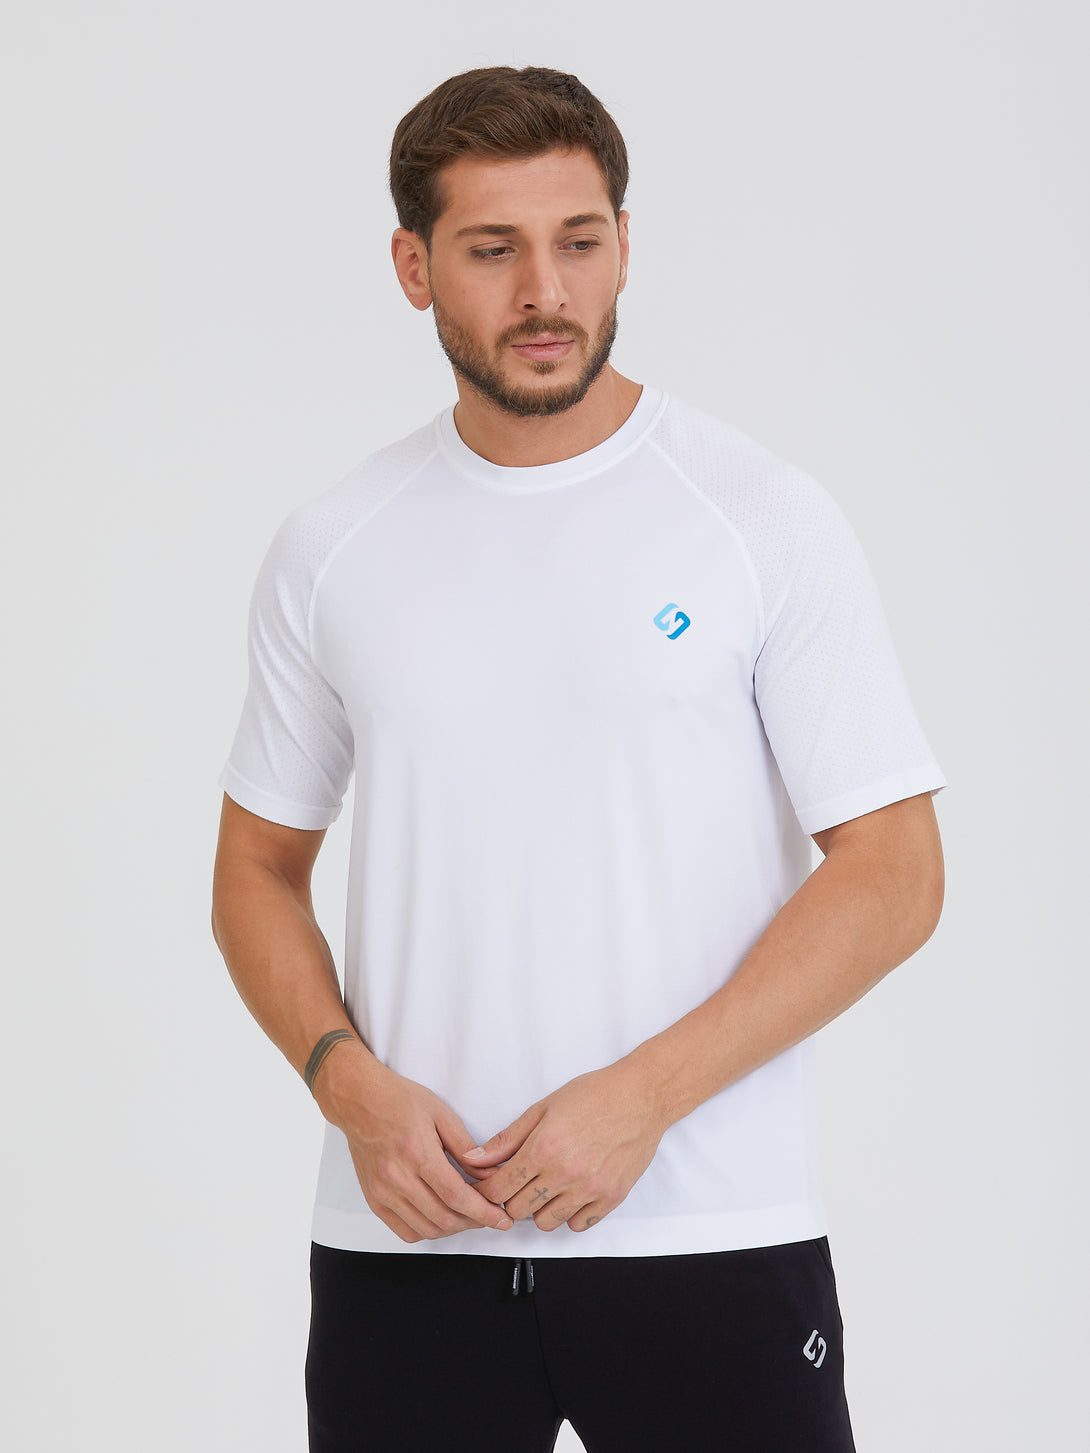 A Man Wearing White Color Seamless Workout Comfort T-Shirt